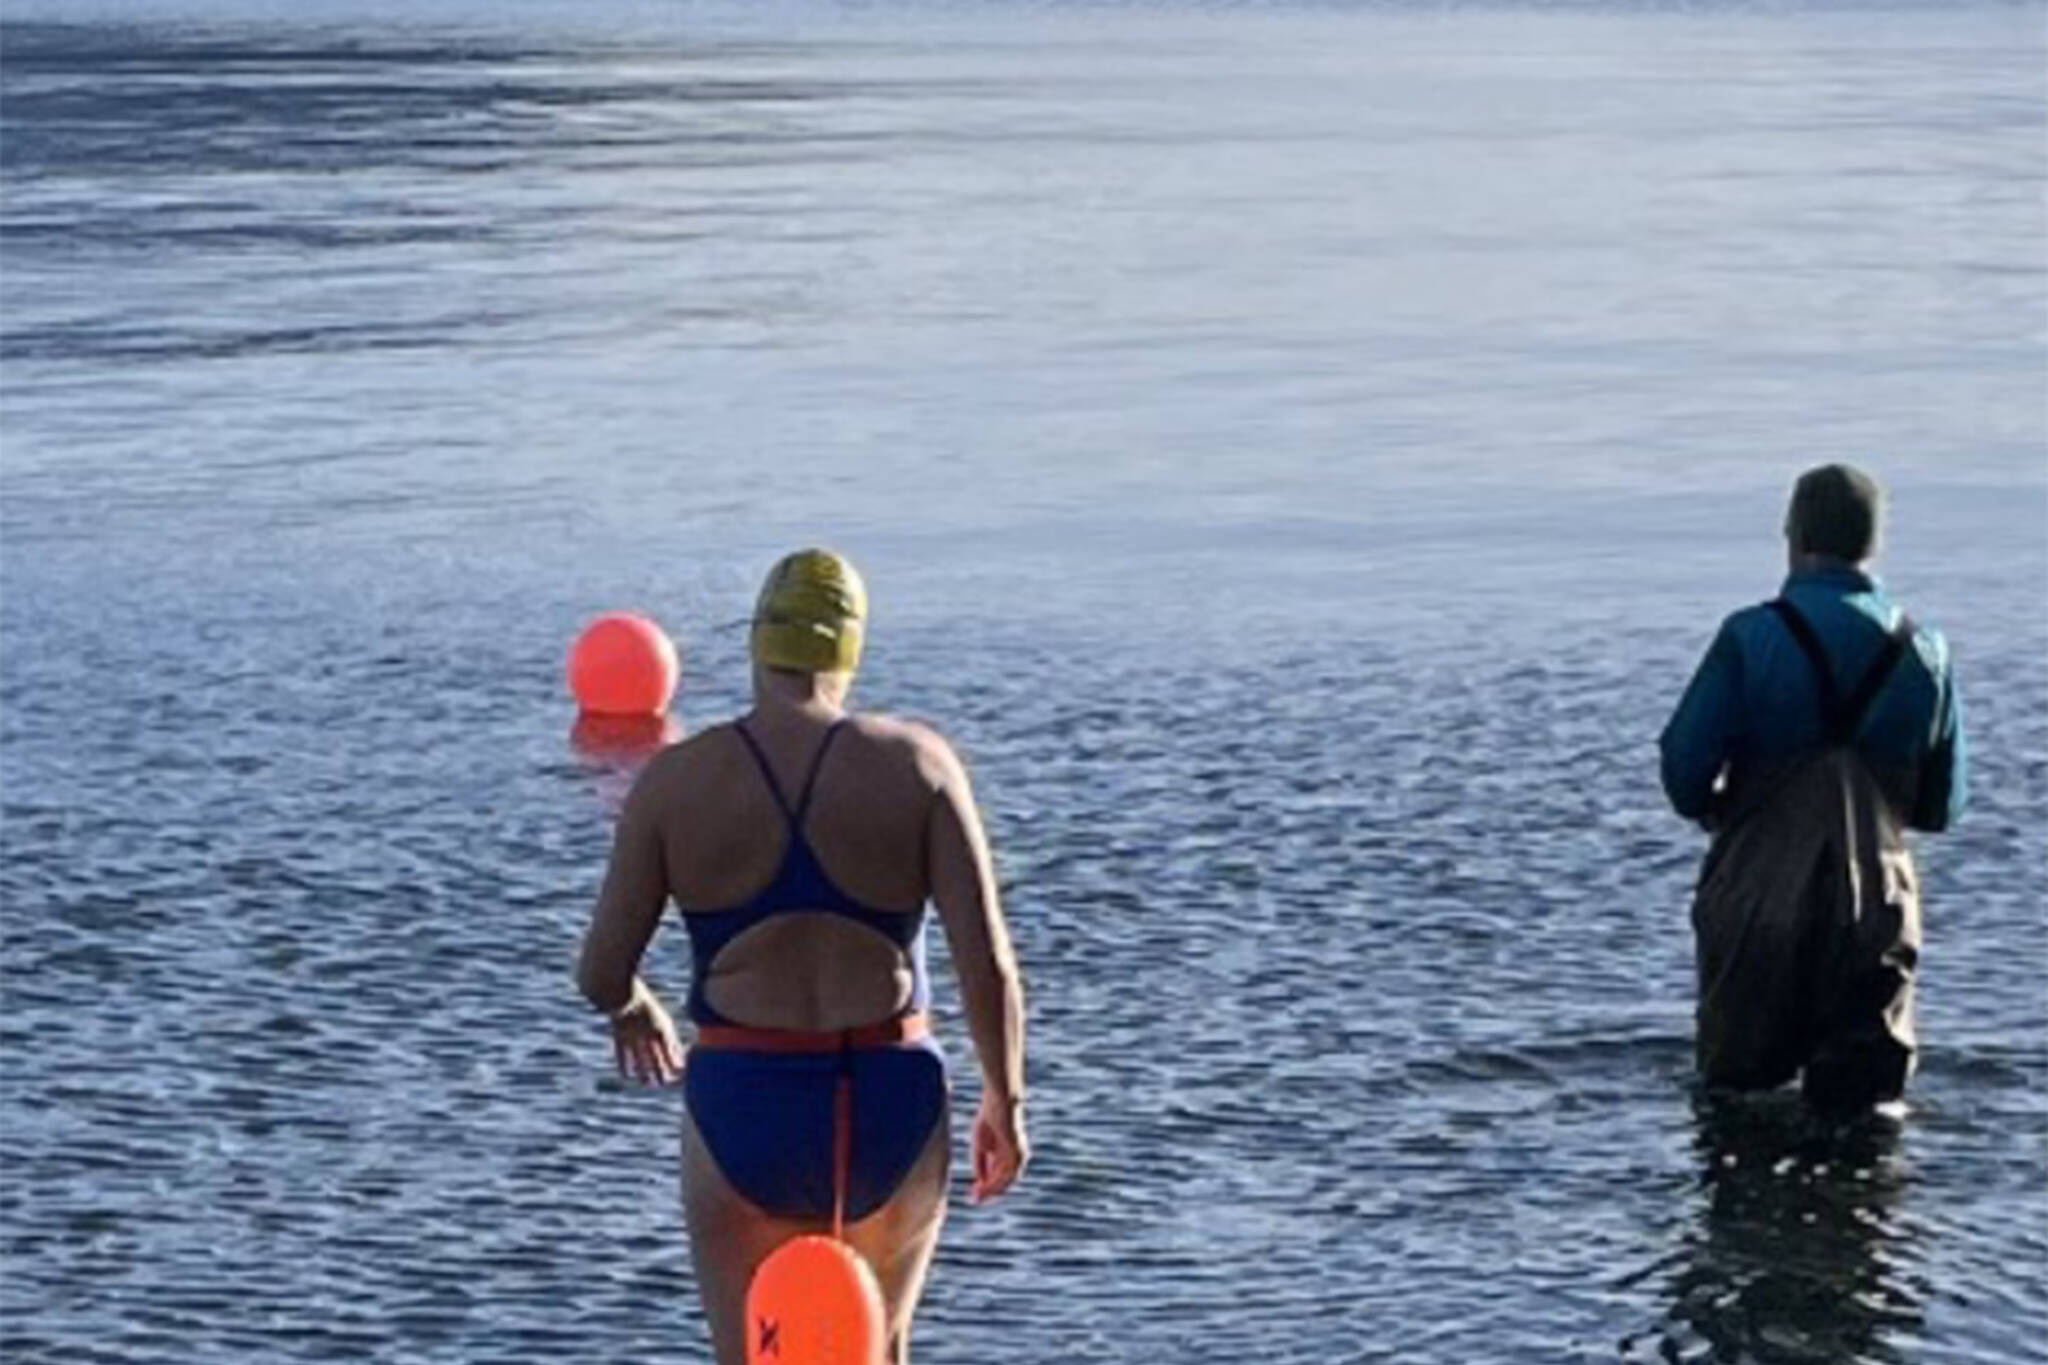 Courtesy photo/Cheryl Fellman
Cheryl Fellman enters the chilly waters of Auke Bay. Freeman is on the verge of becoming one of only 43 Americans — and 422 people worldwide — to swim an official Ice Mile.